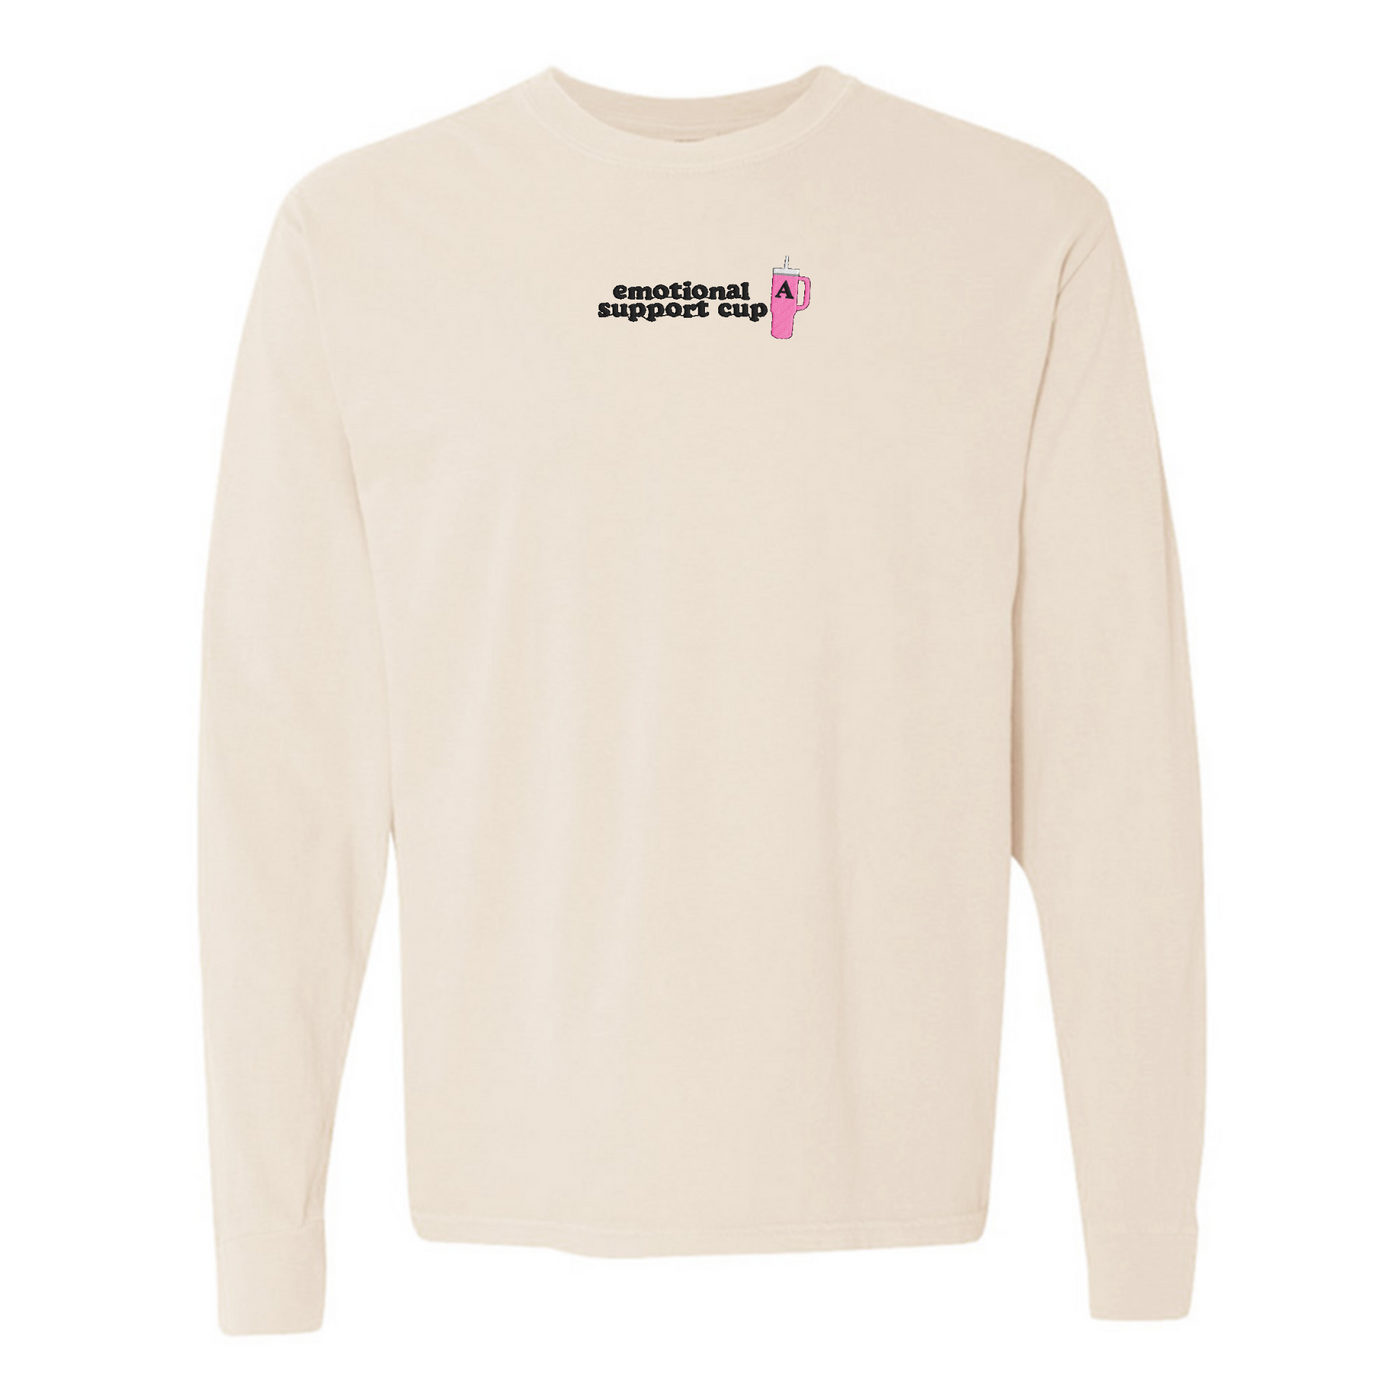 Initial 'Emotional Support Cup' Long Sleeve T-Shirt